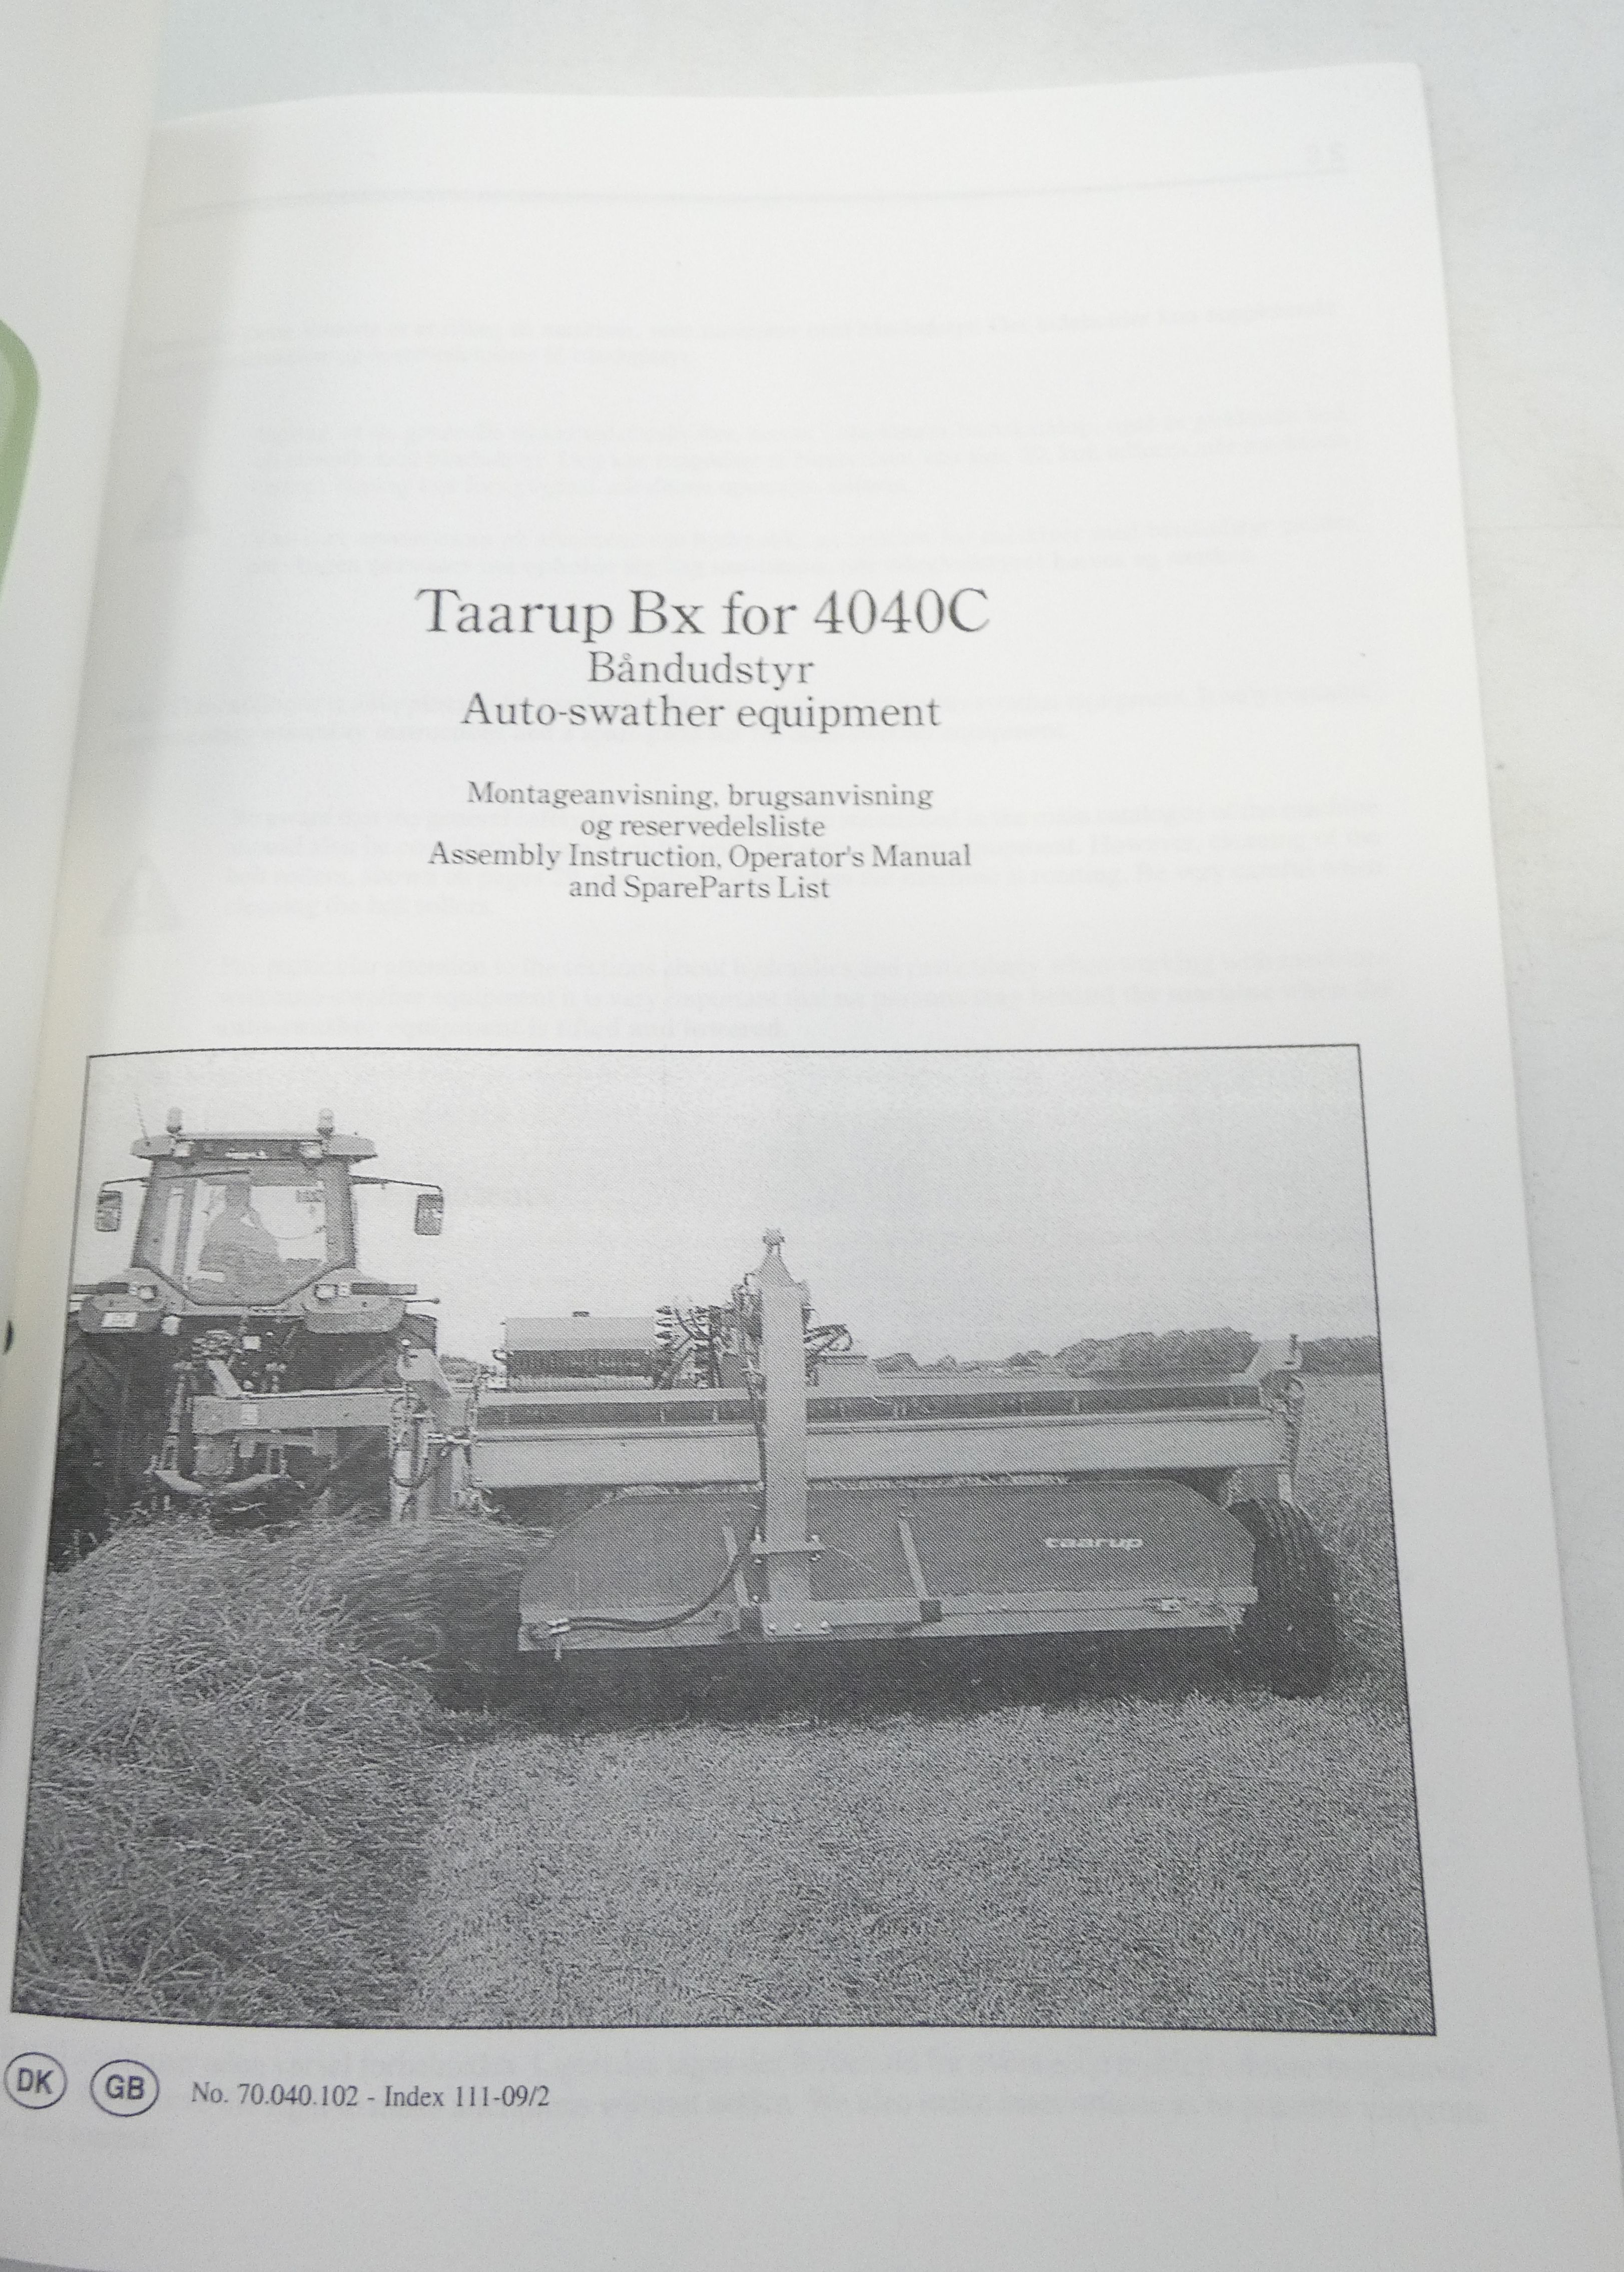 Taarup BX for 4040C auto-swather equipment assembly instruction, operator's manual